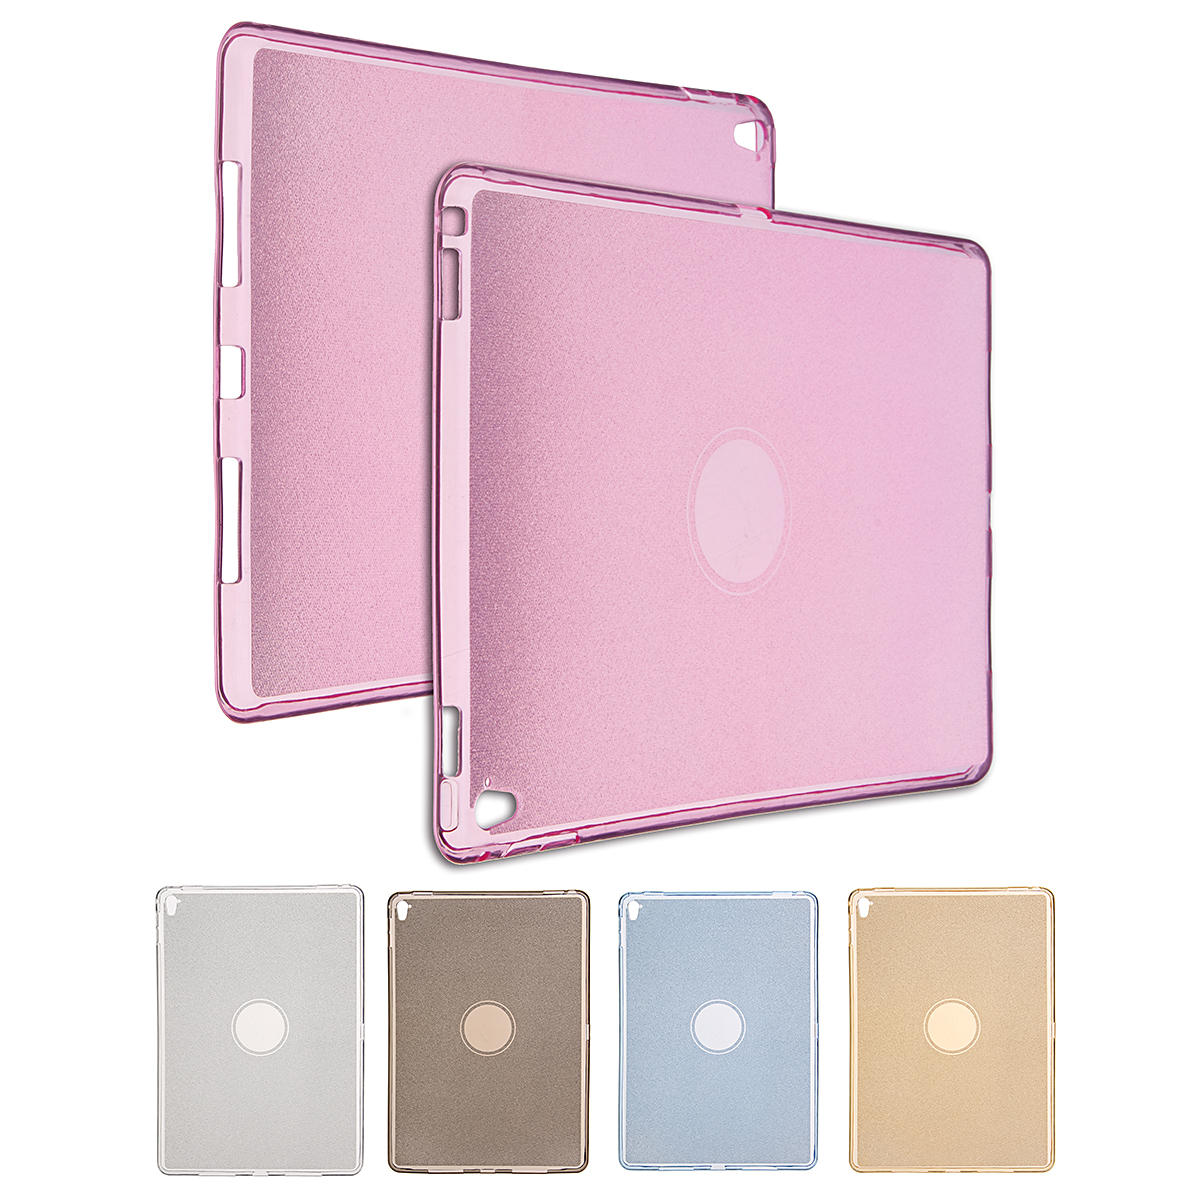 

Shining Glitter Translucent Soft Silicon Shockproof Tablet Cover Case For iPad Pro 9.7"